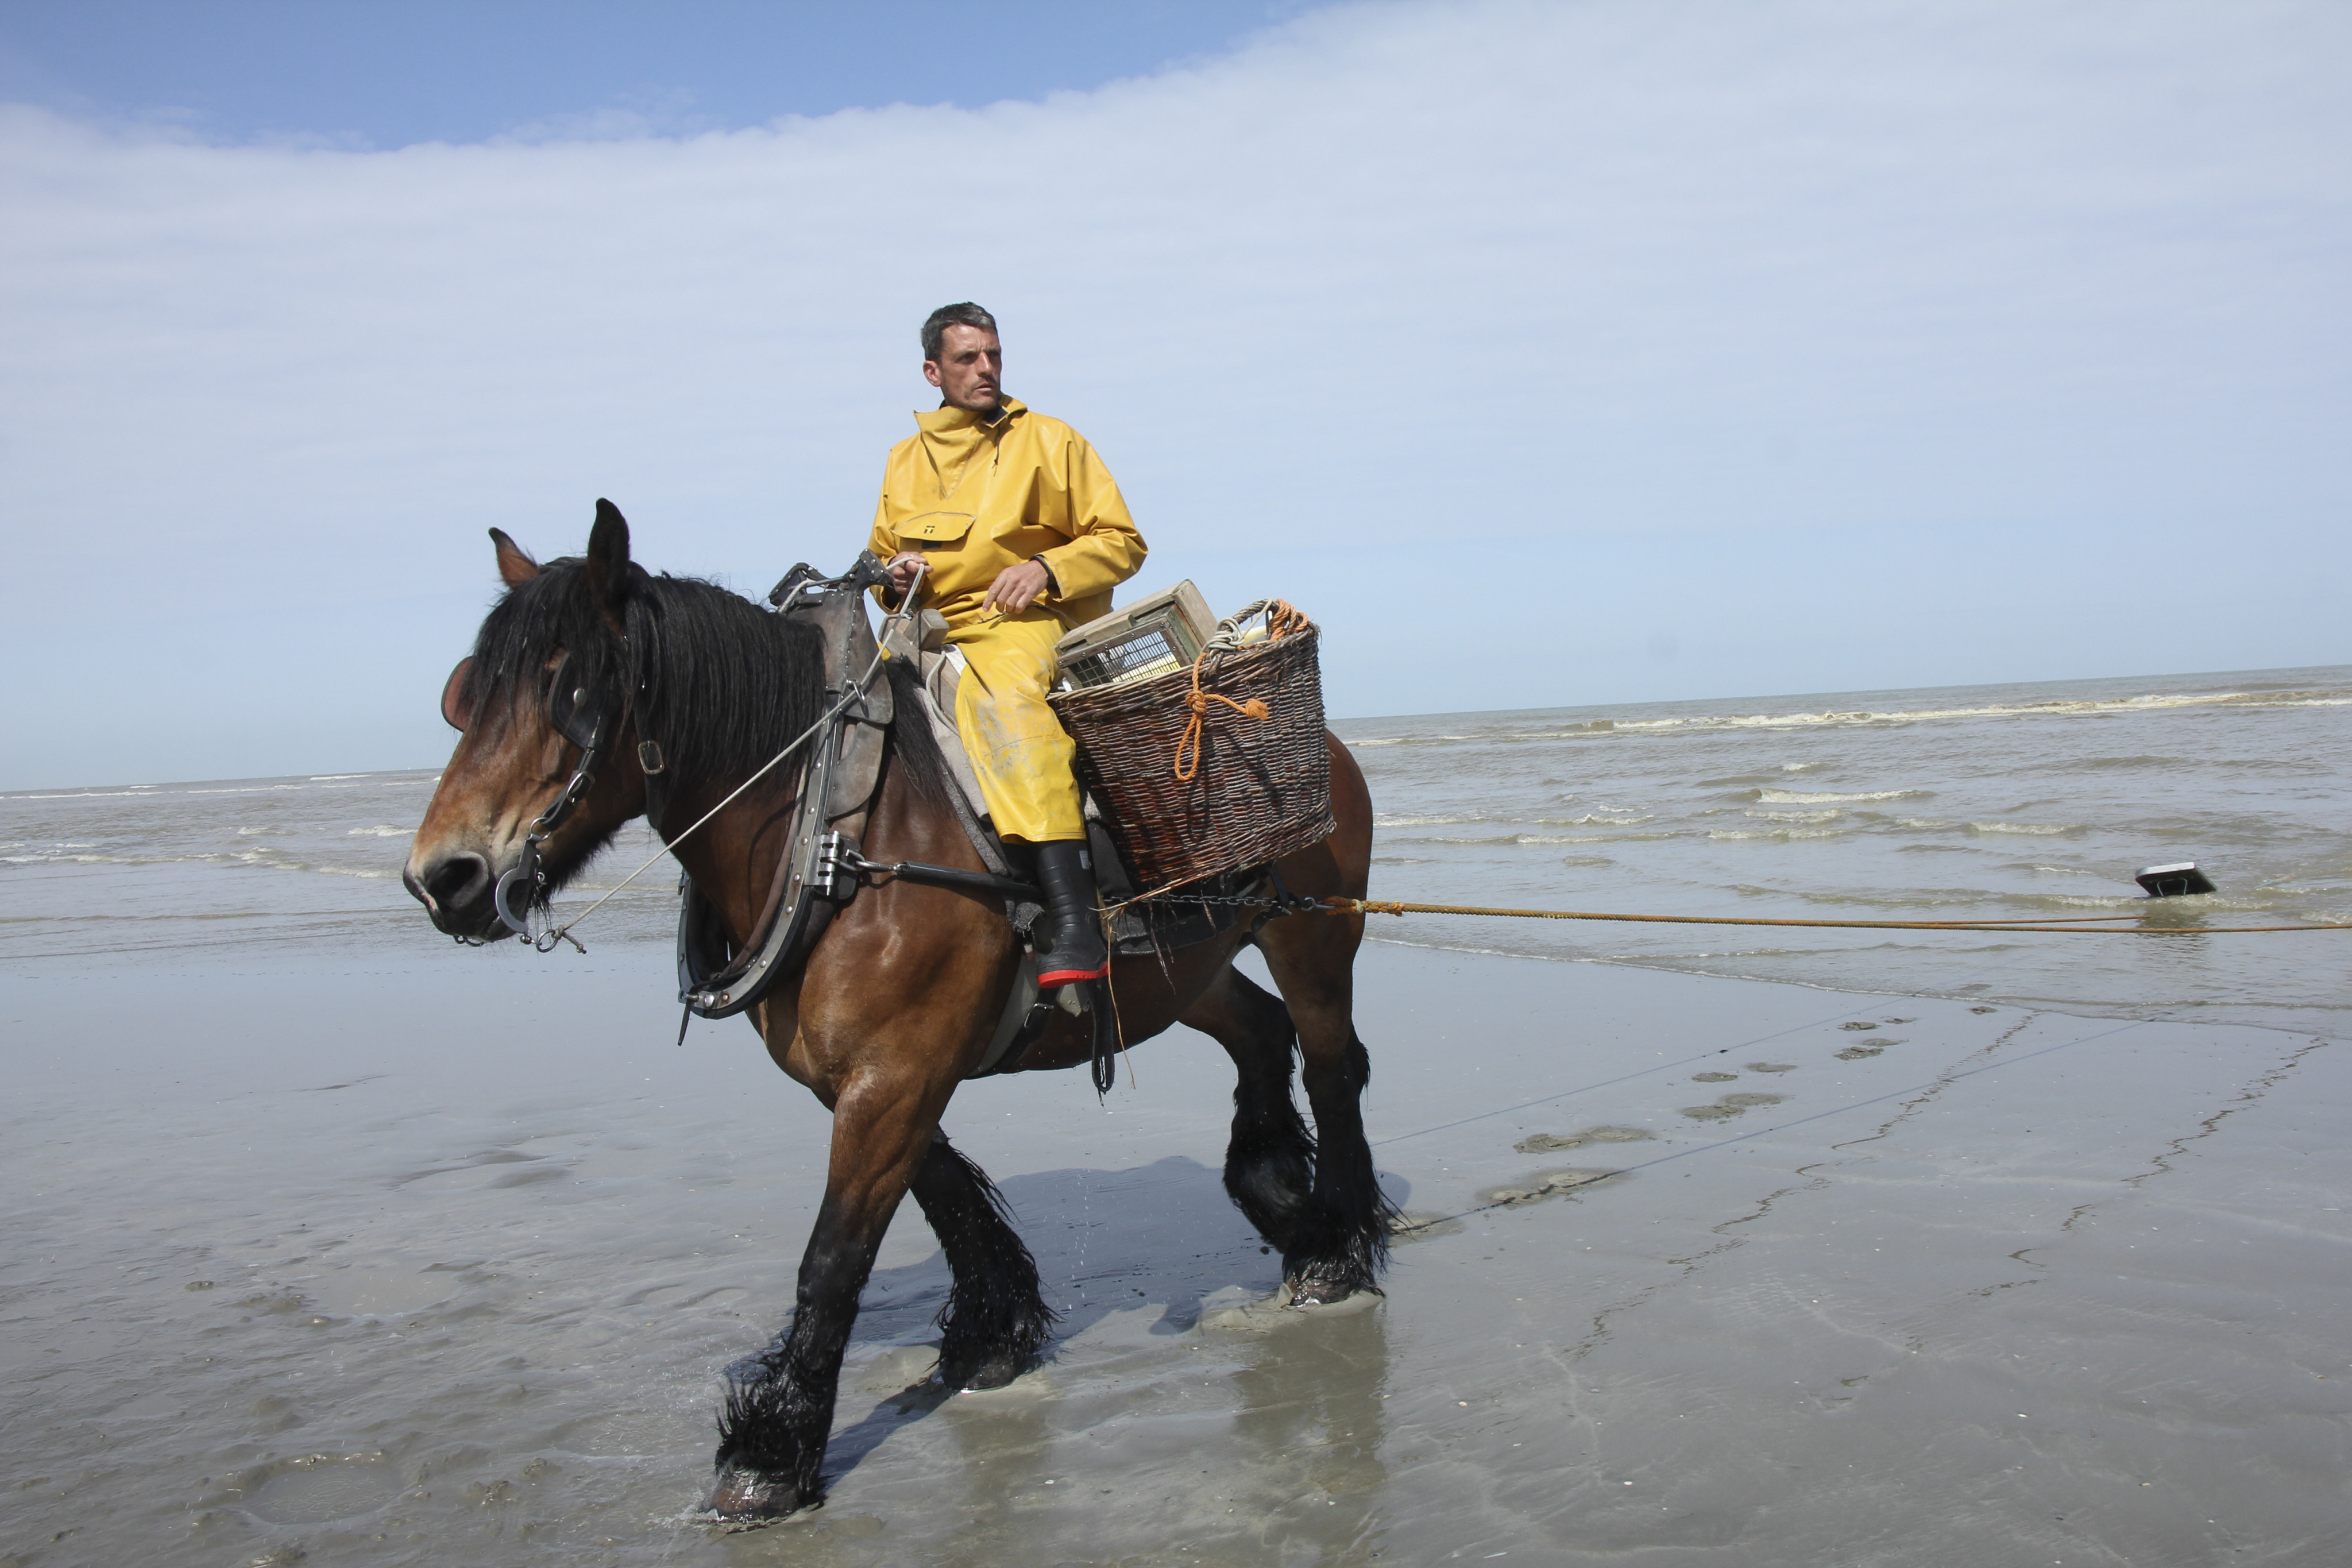 A horse-riding shrimp fisherman drags the shallow waters at the Belgian beach resort of Oostduinkerke. The traditional practice was recognised in 2013 by Unesco as intangible cultural heritage. Photo: John Brunton